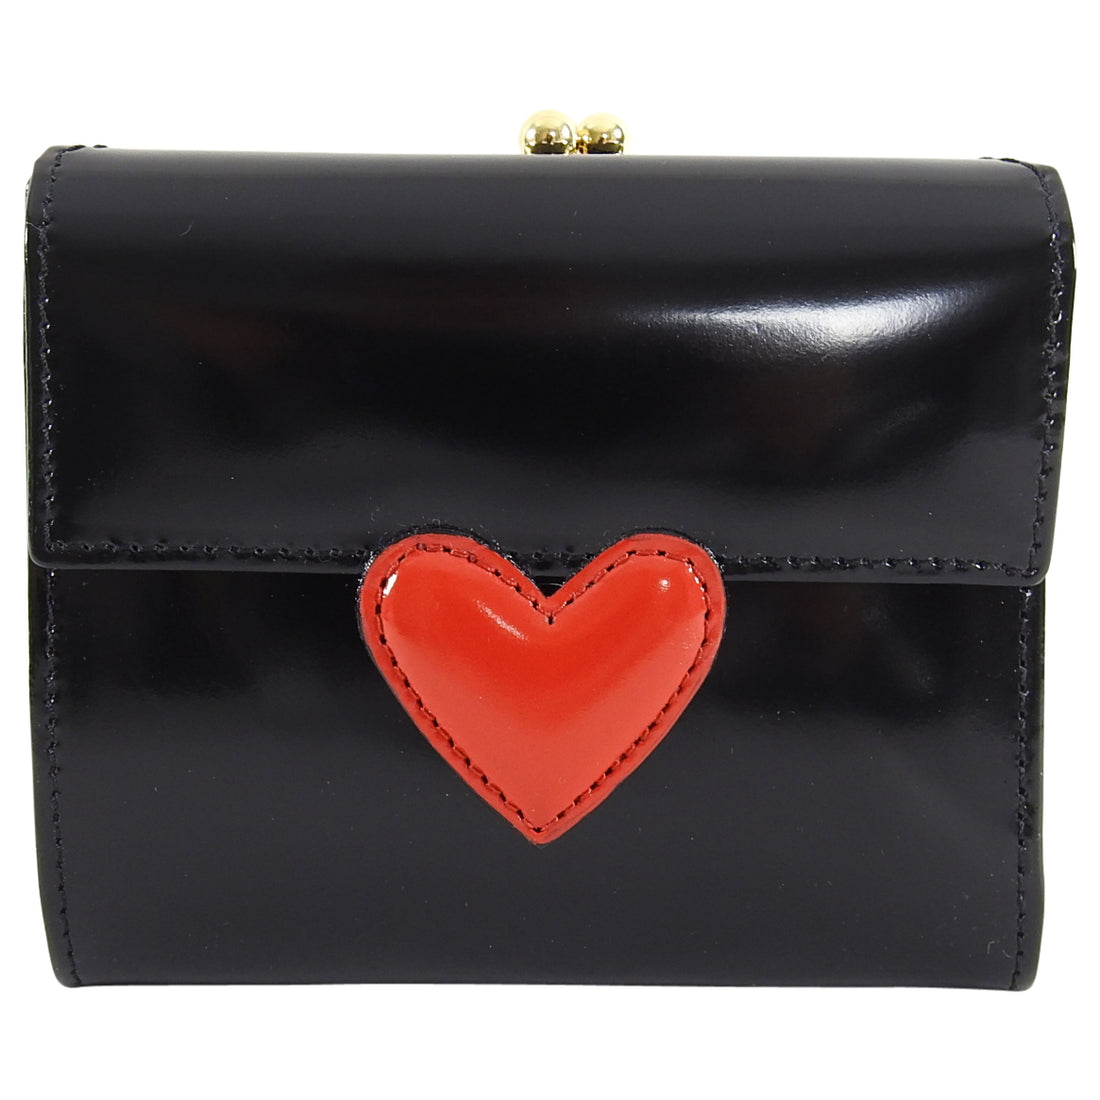 Moschino Black leather with Red Heart Wallet - New in Box